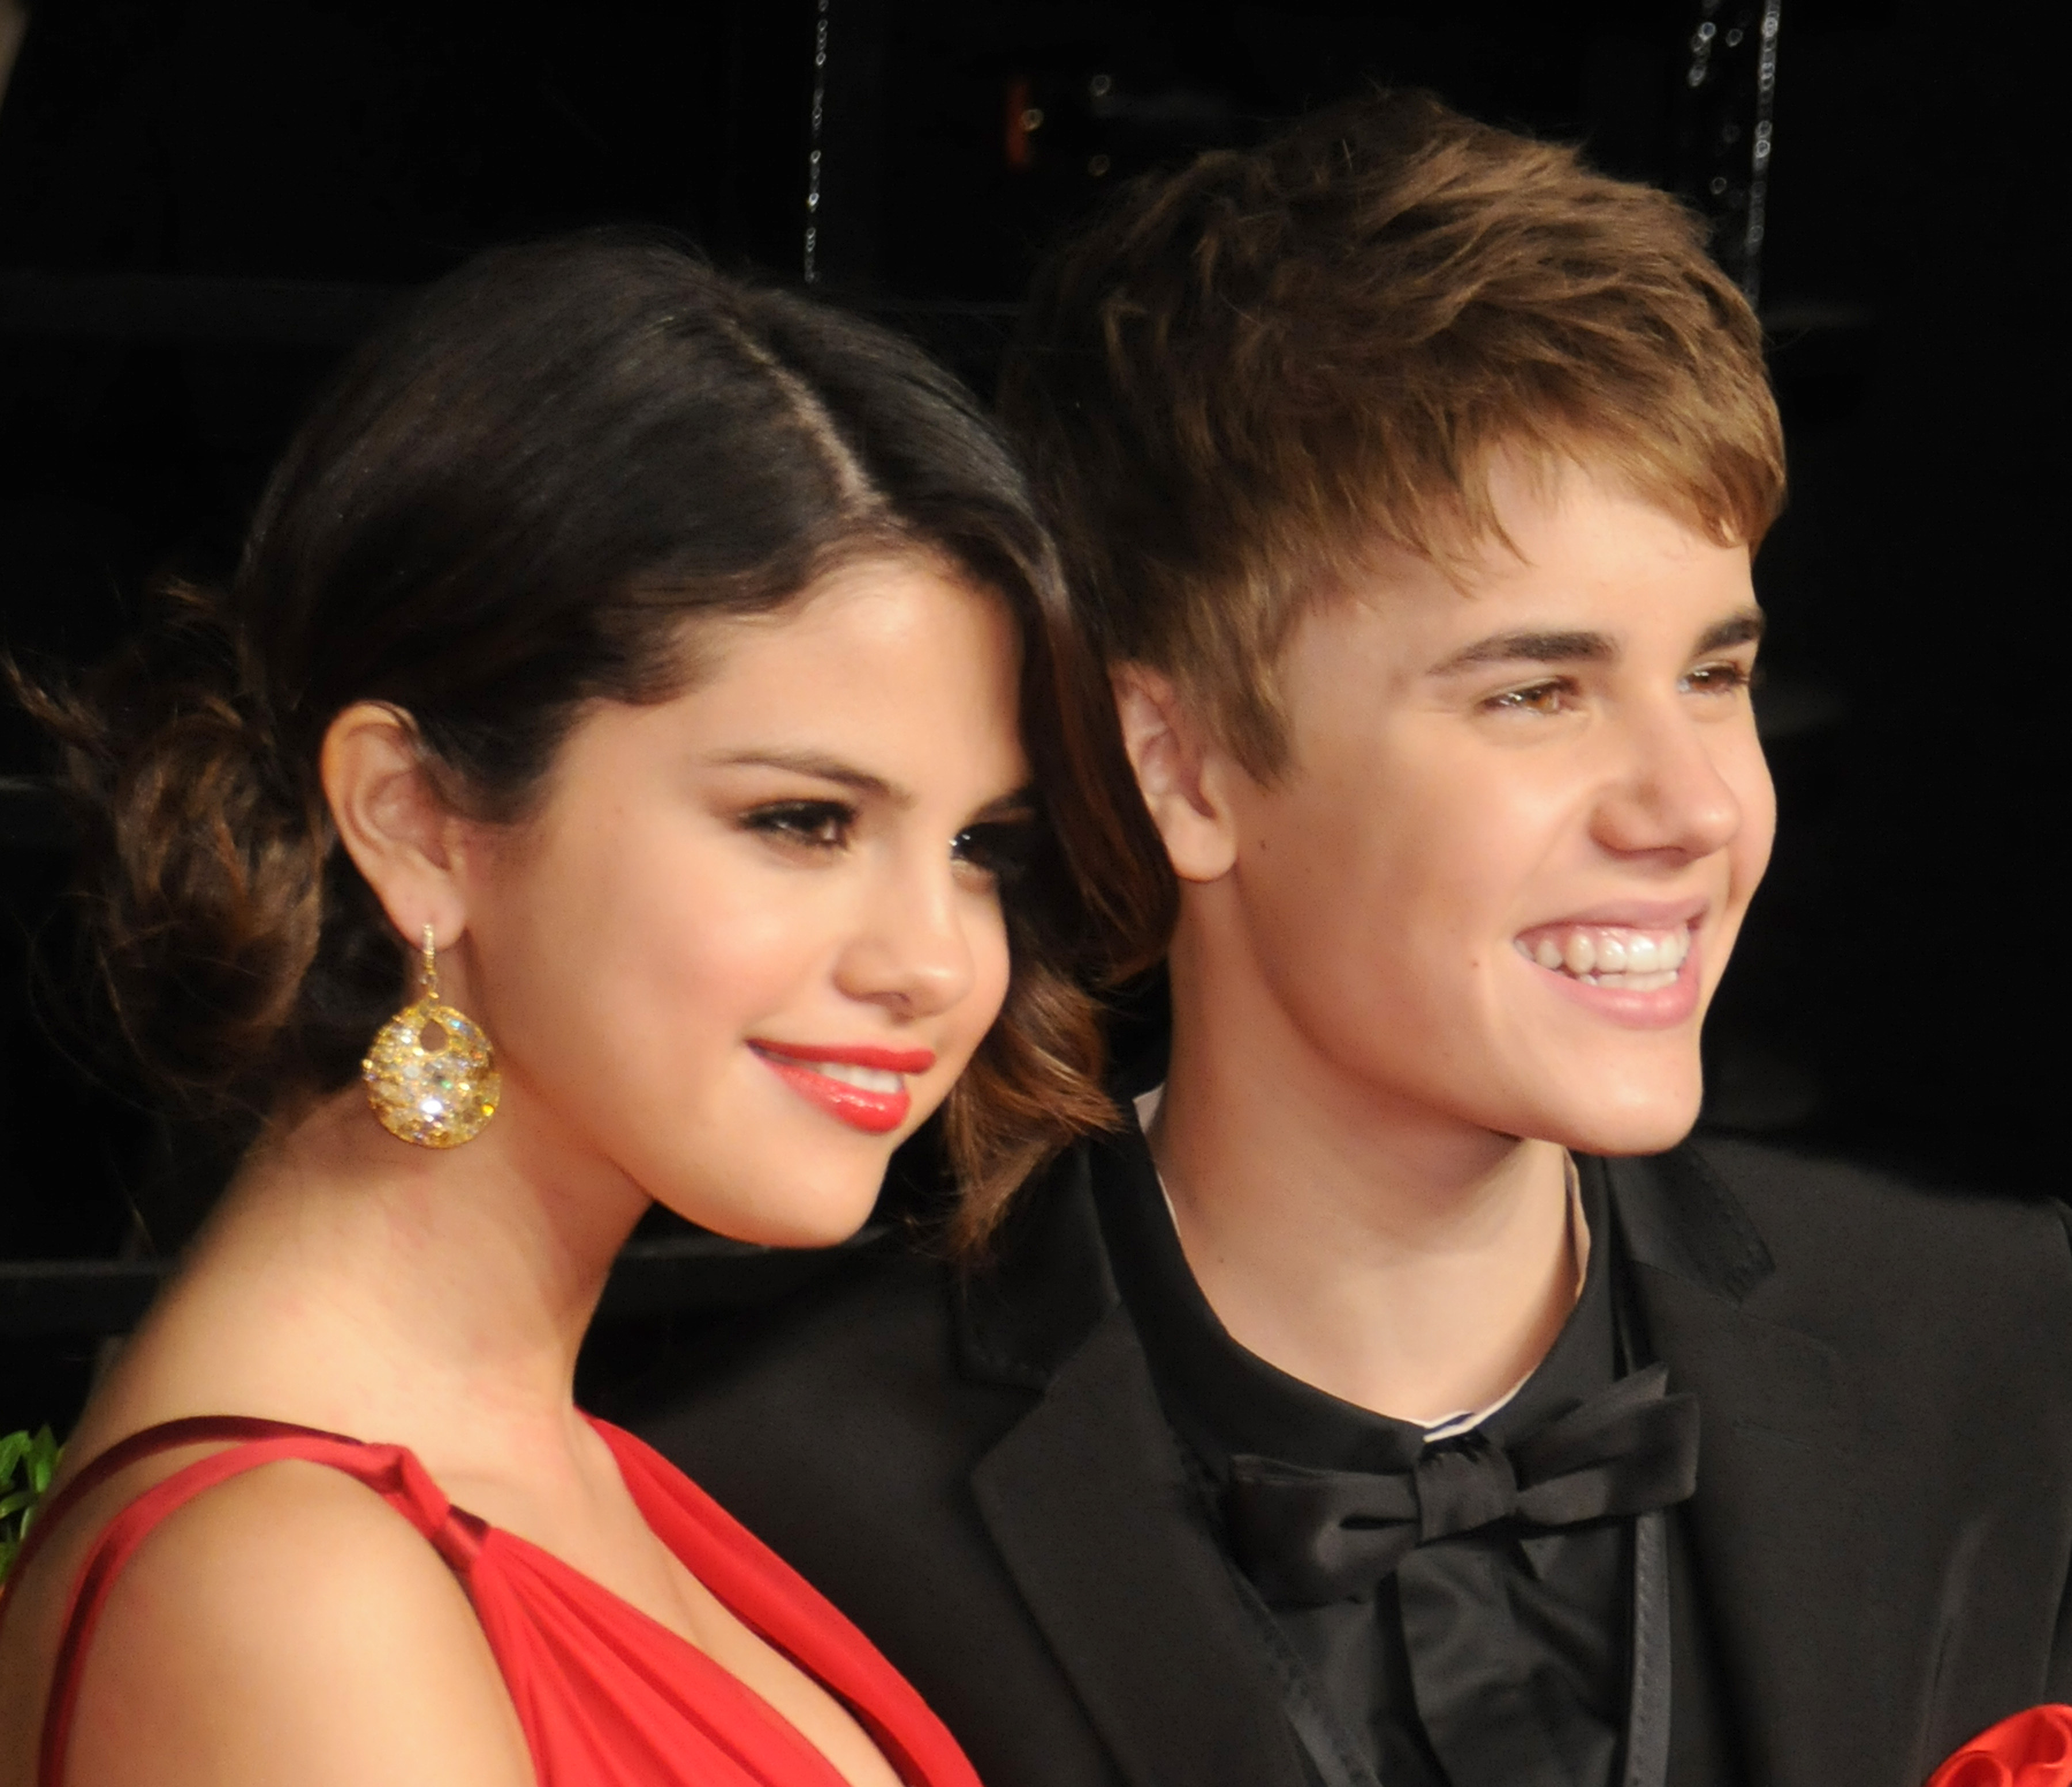 Selena Gomez and Justin Bieber on February 27, 2010 in West Hollywood, California. | Source: Getty Images